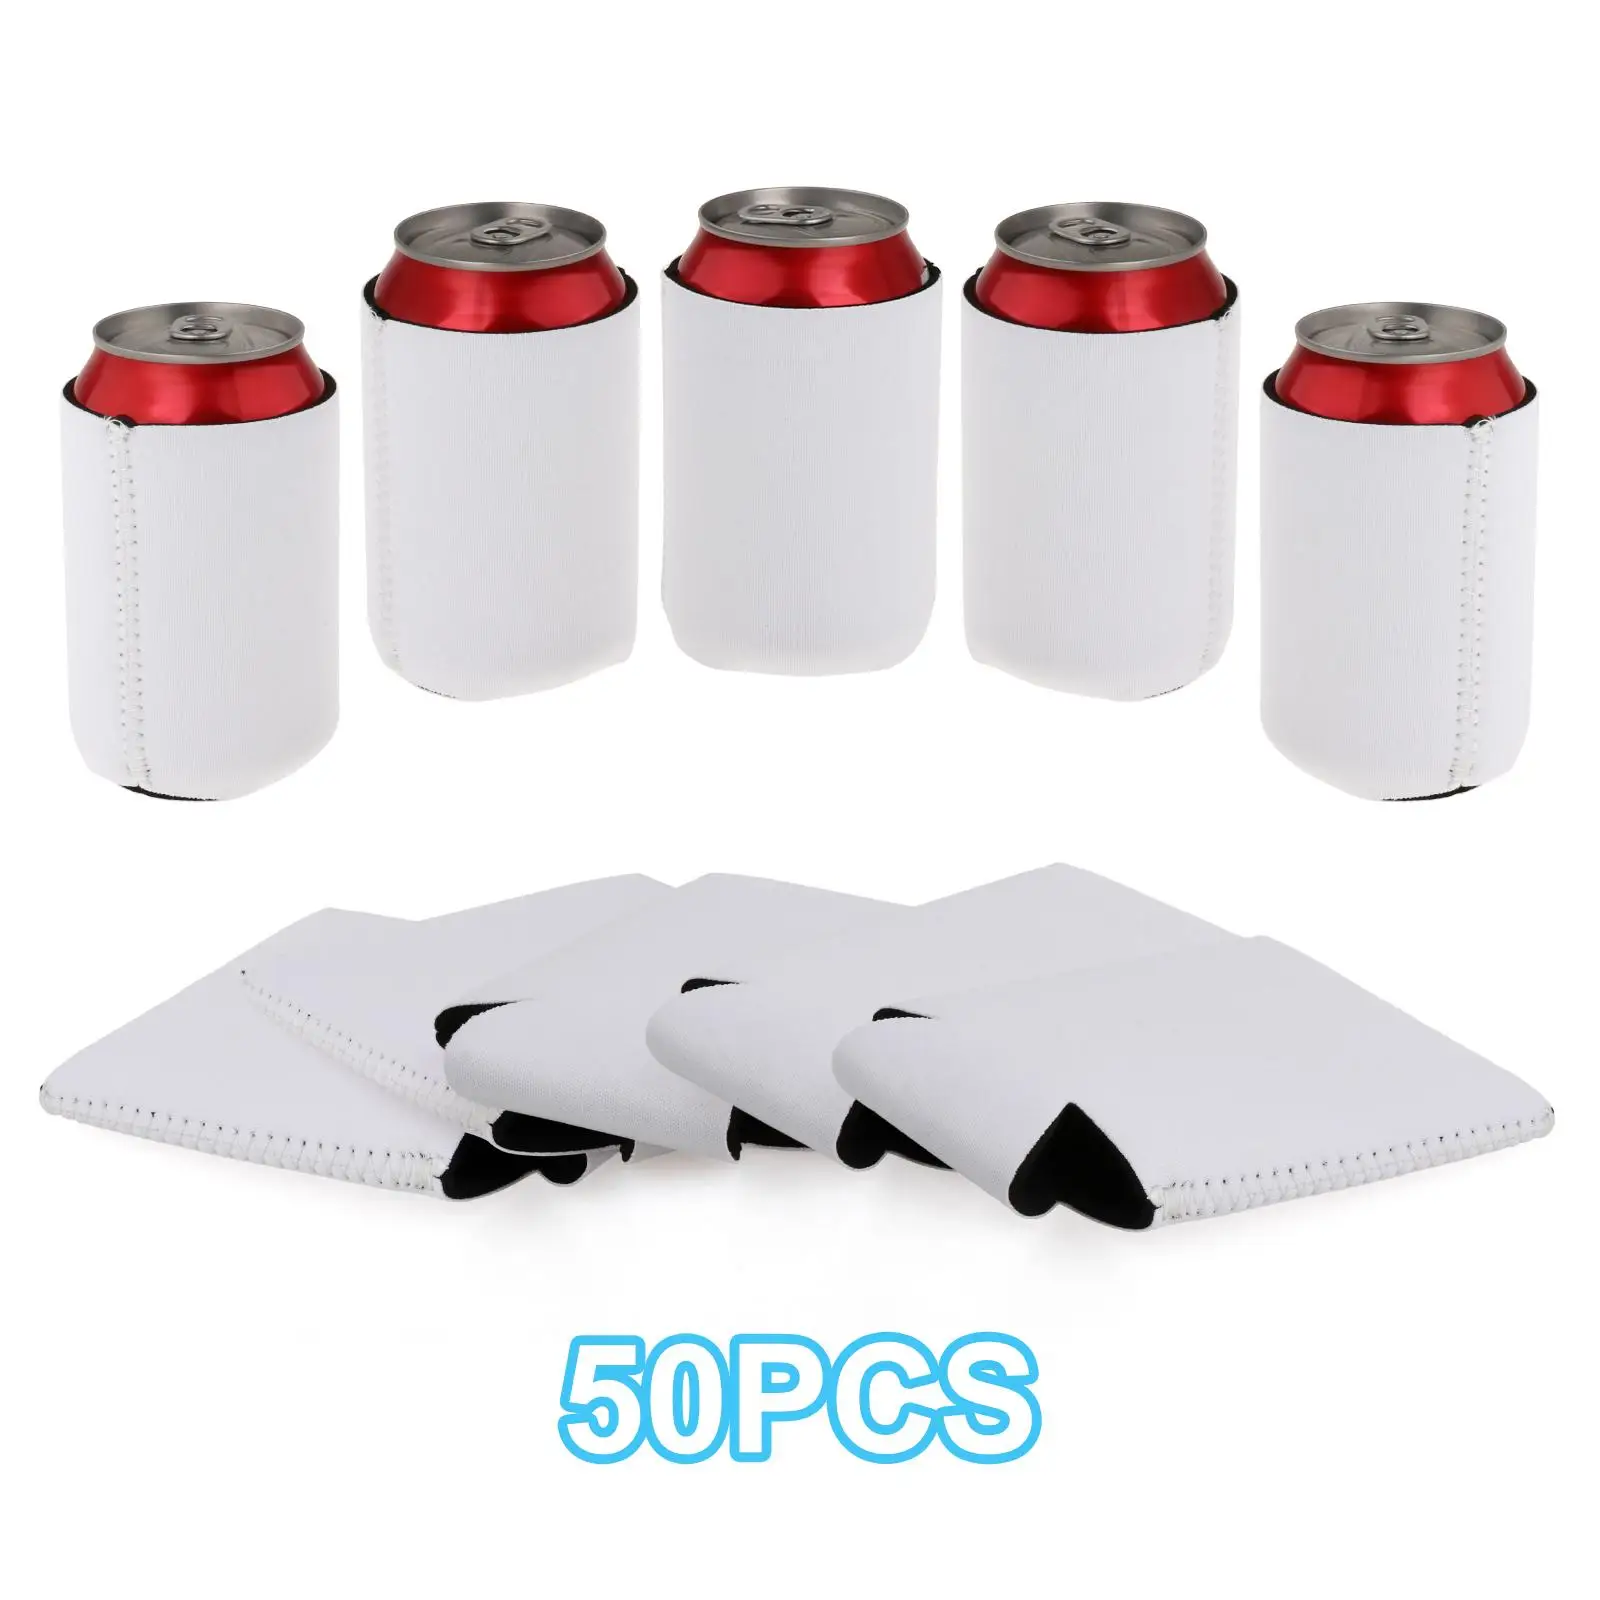 50Pcs Can Coolers Blank Can Coolers Sleeves Water Bottle Sleeves Collapsible Cover for Soda, Beer, Water Bottles HTV Projects